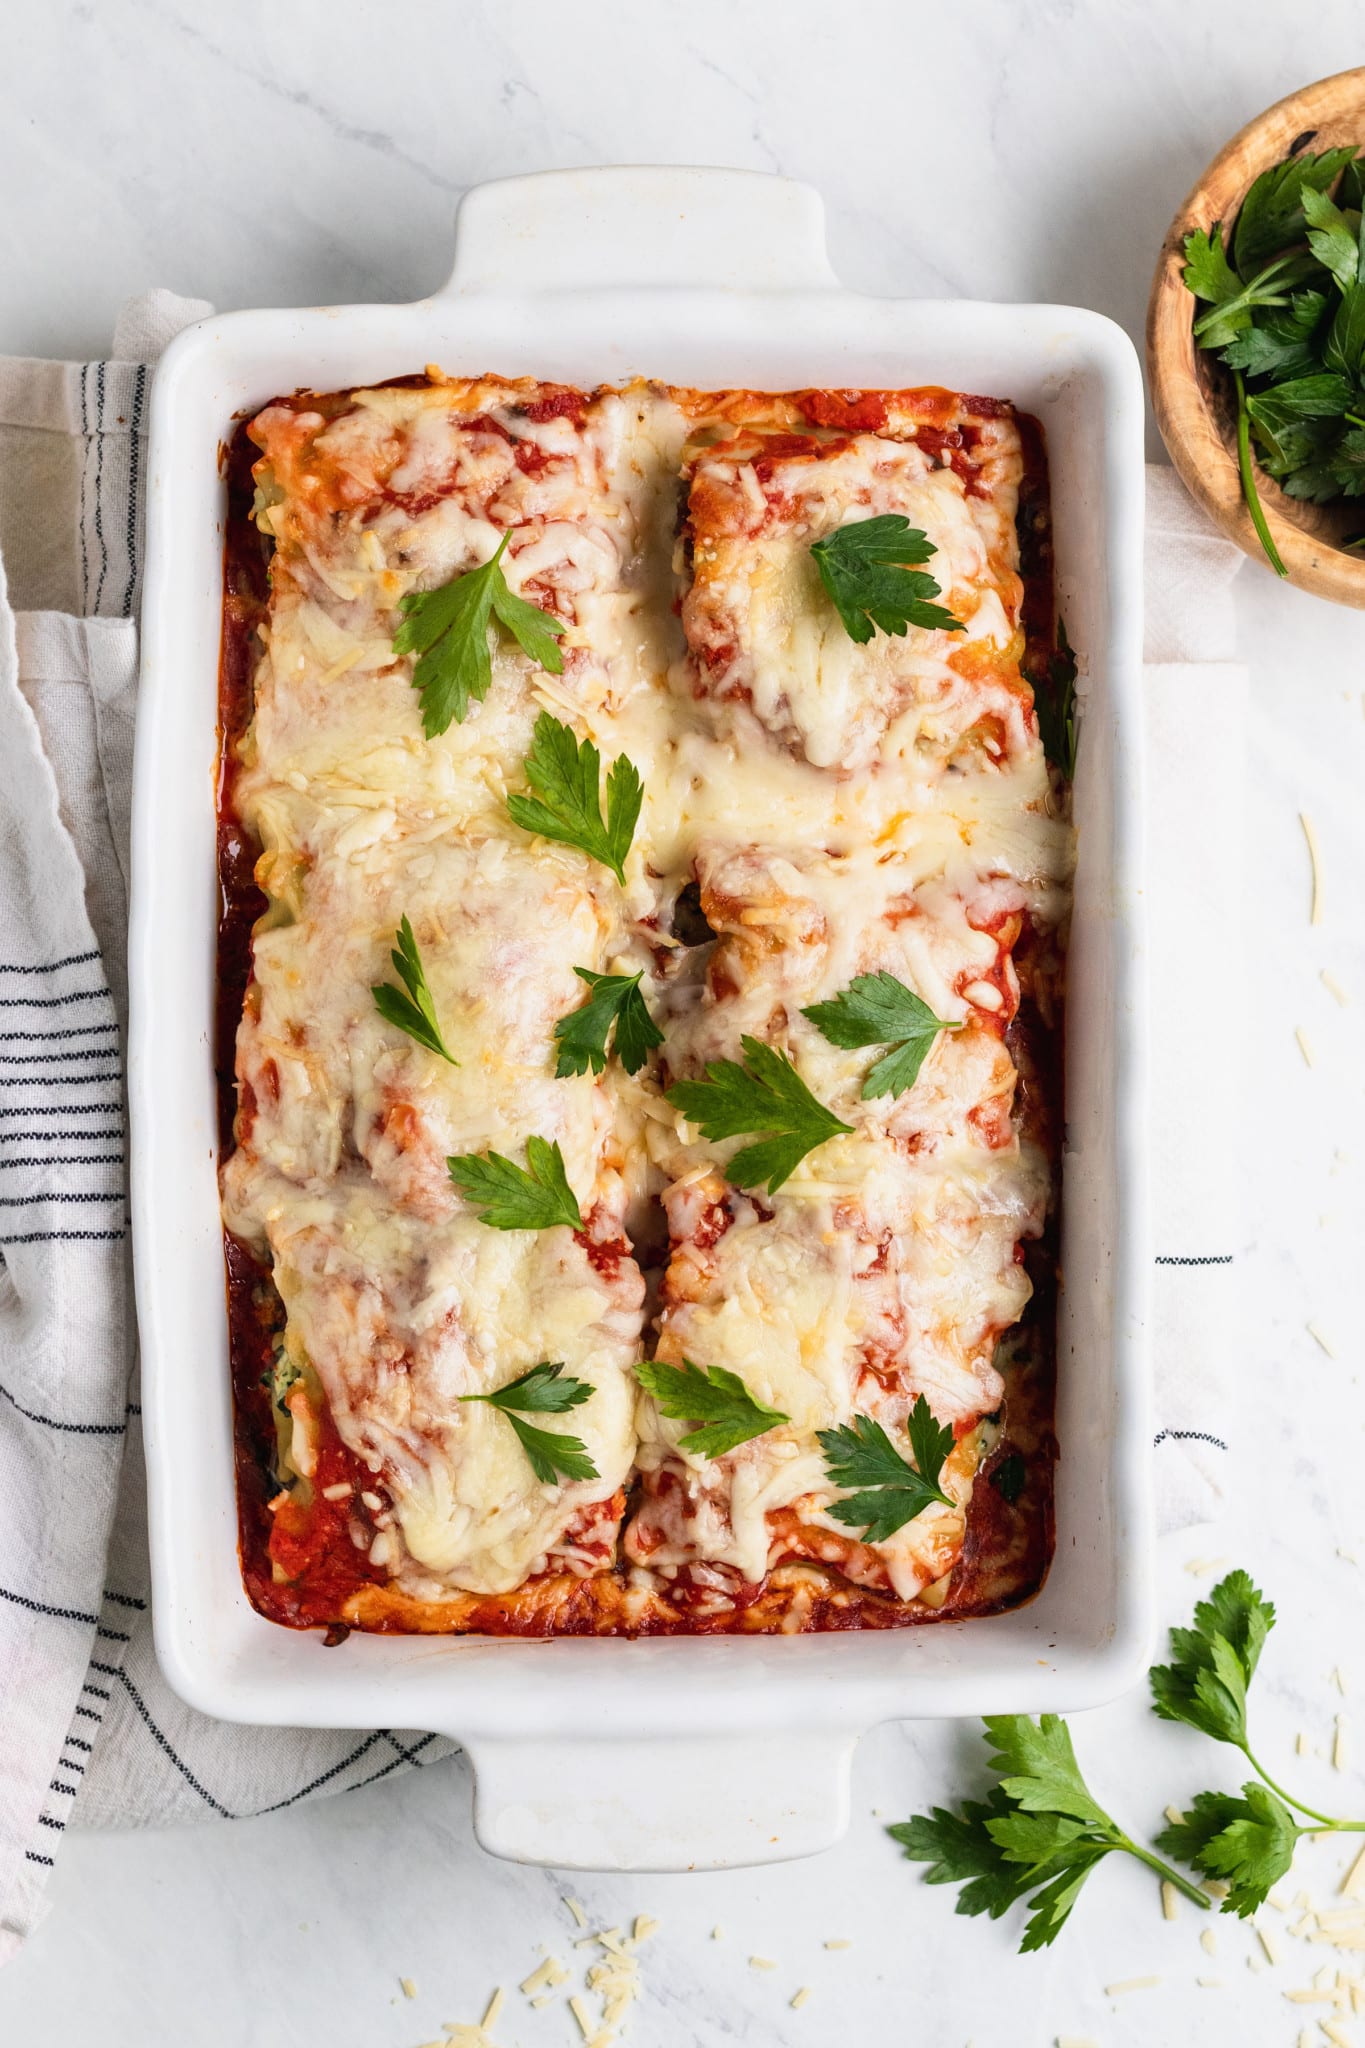 cheesy spinach ricotta rolled up into a lasagna noodle covered in red sauce in a casserole dish